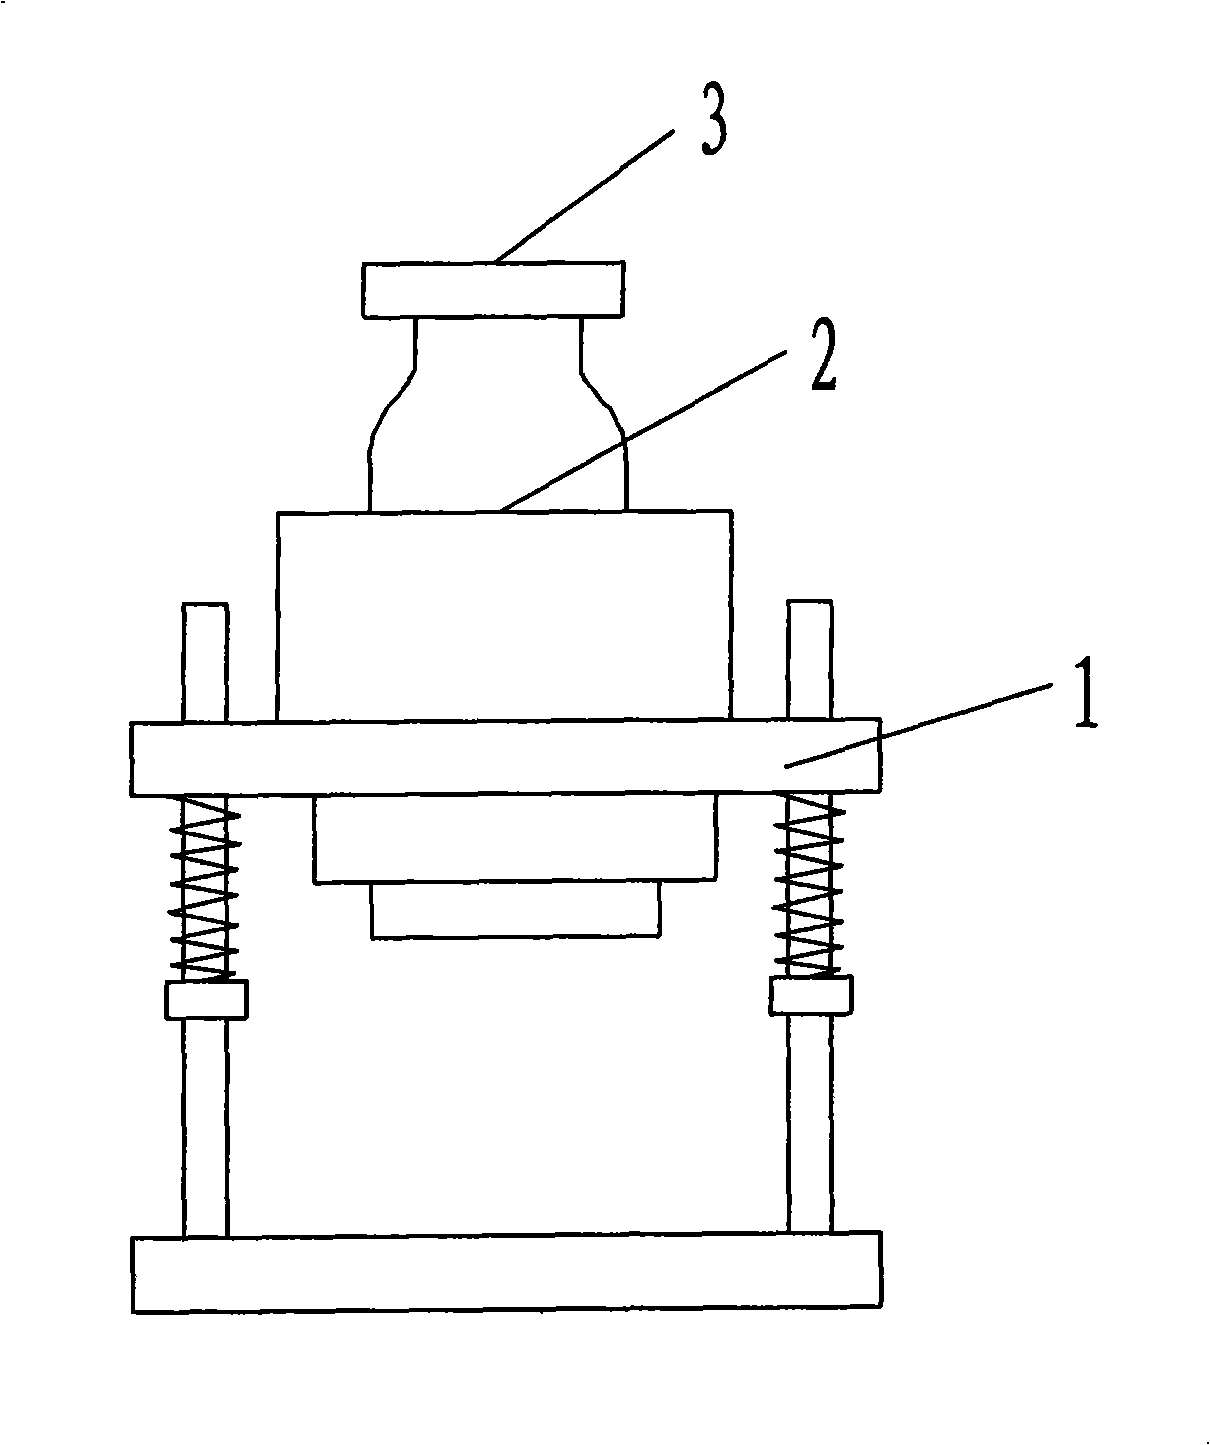 Shell-making method of investment casting of flow guiding body